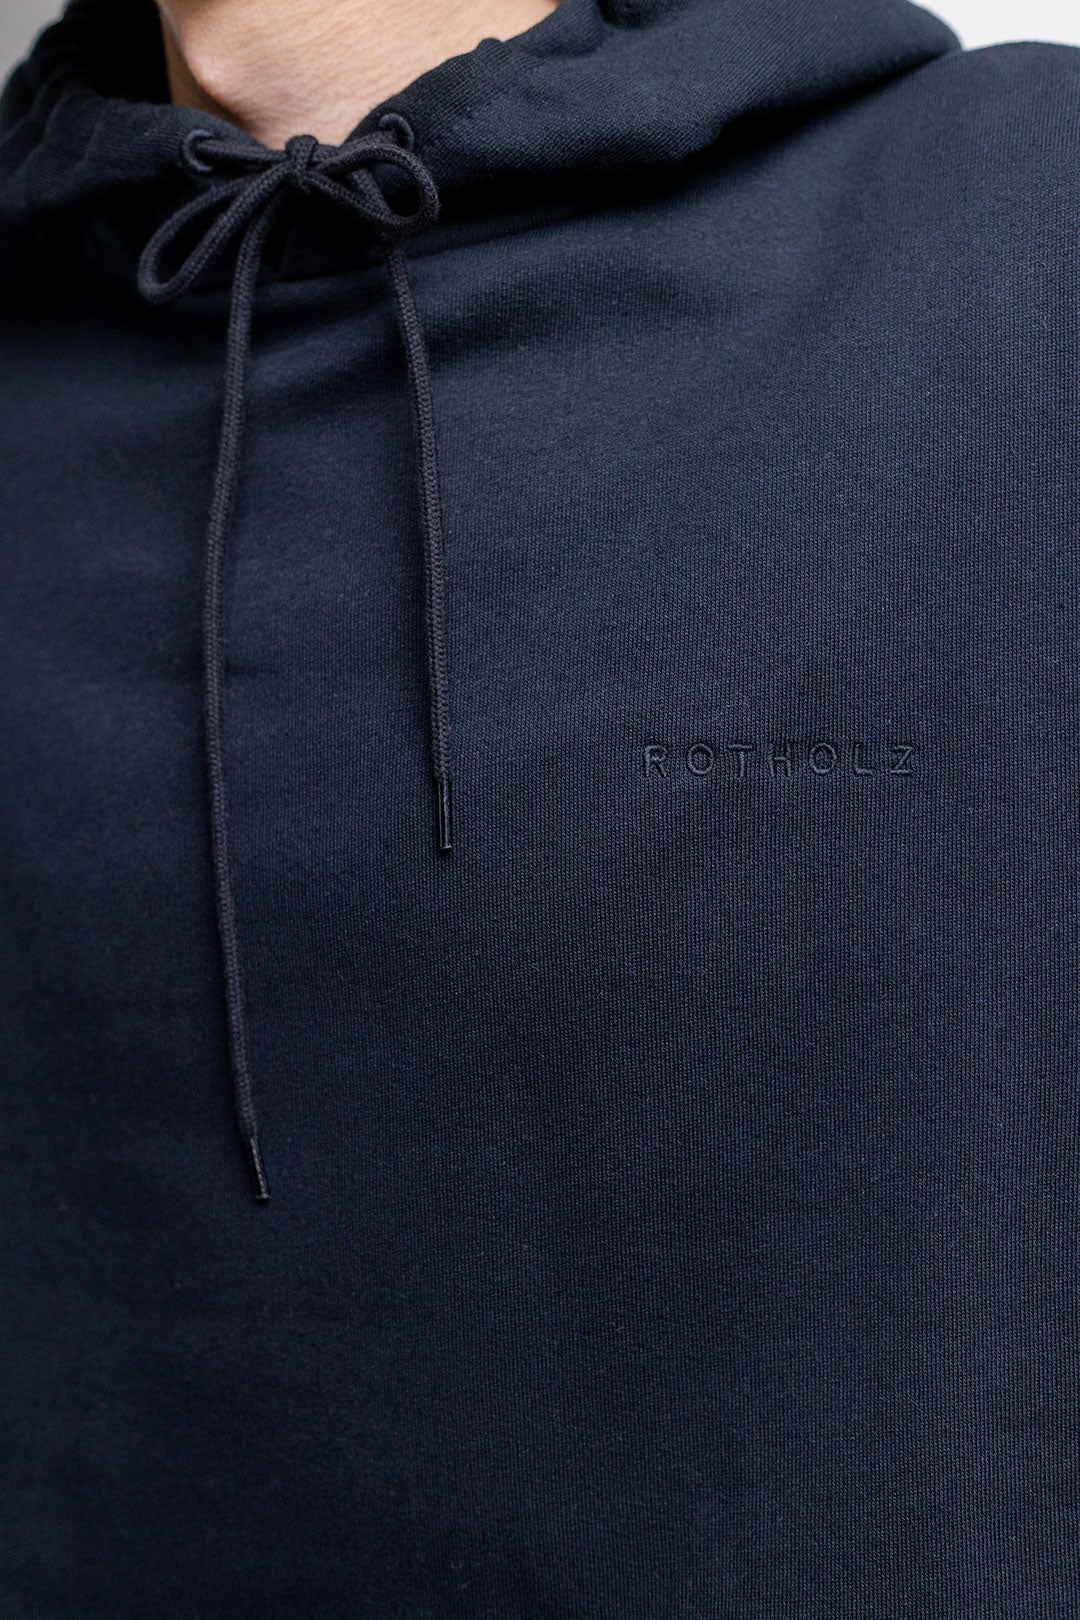 Black hoodie logo made from 100% organic cotton from Rotholz